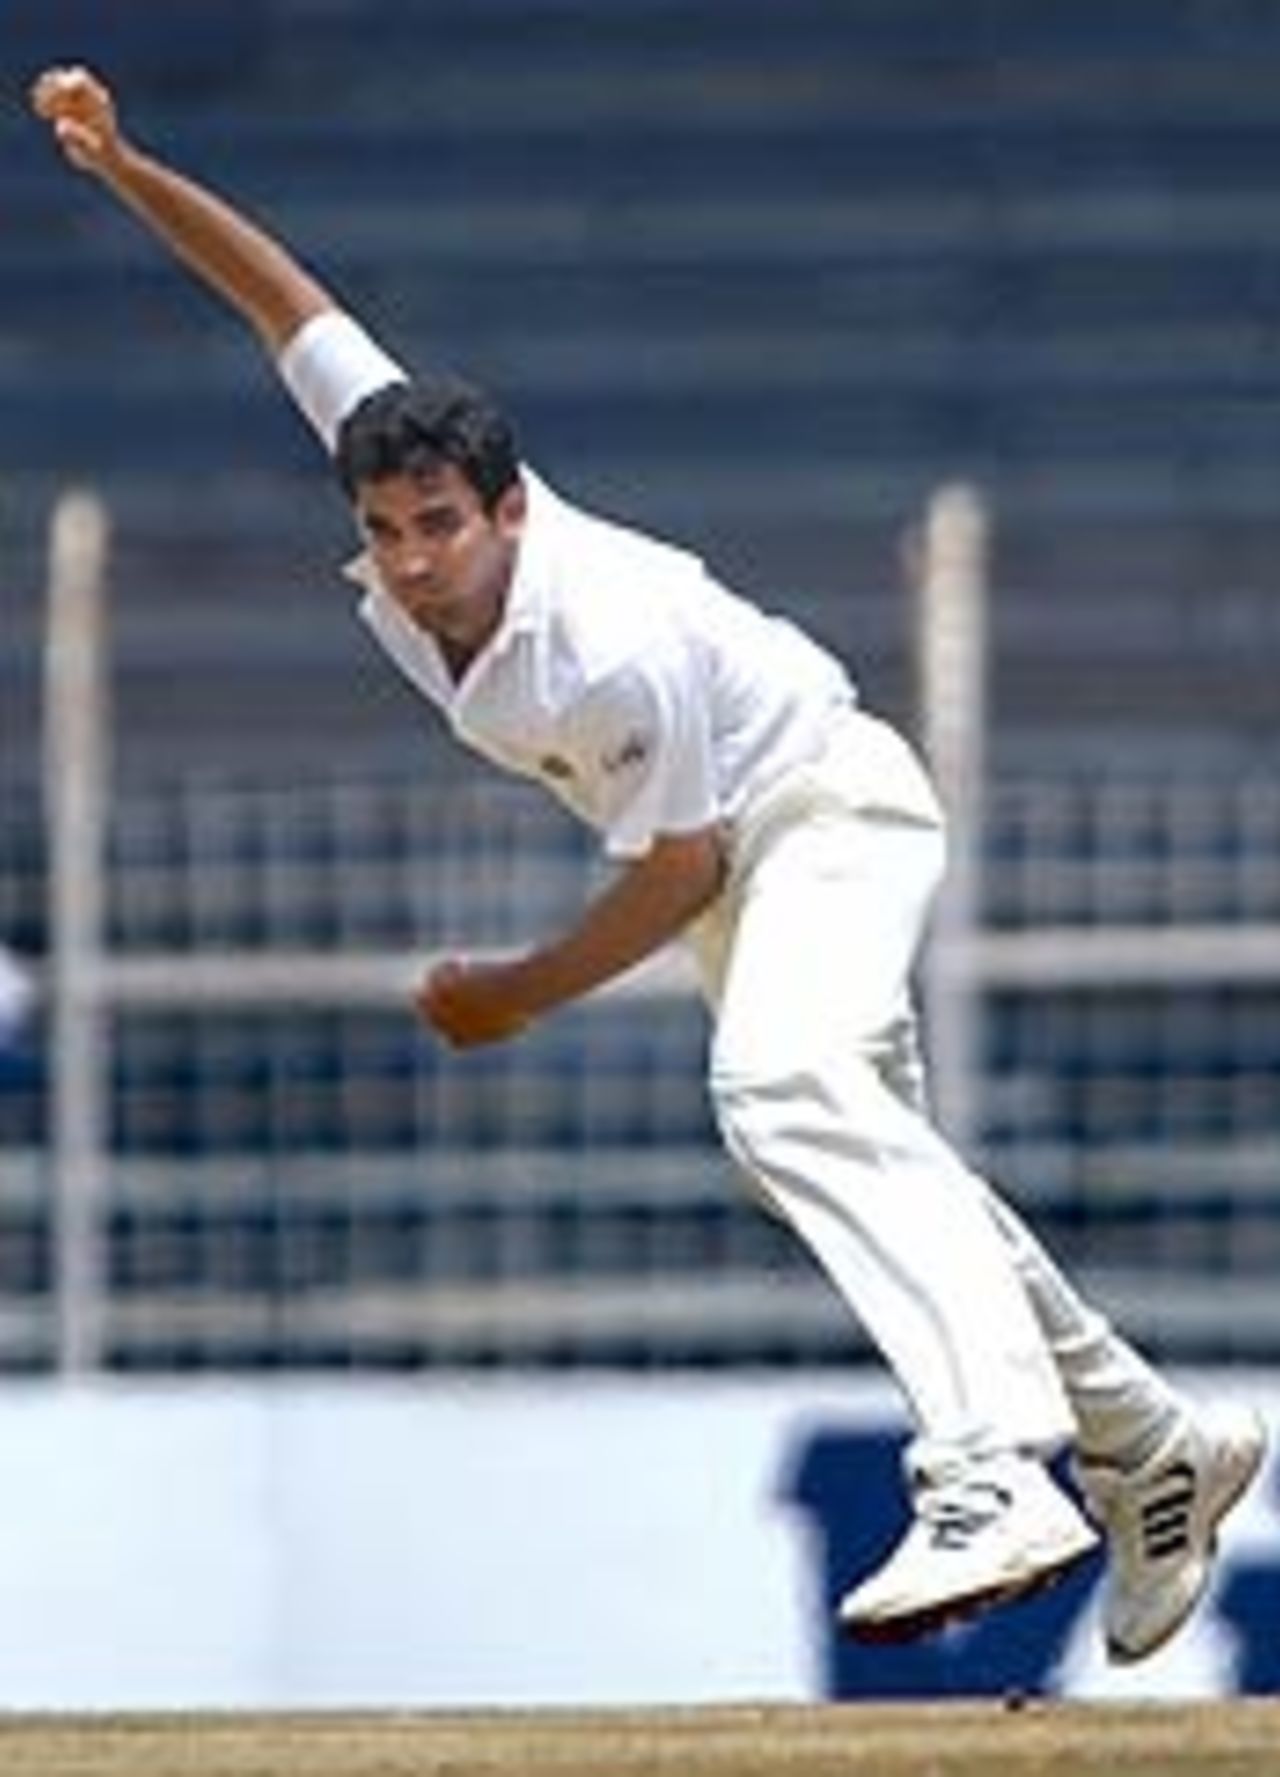 Zaheer Khan on his way to 5 for 74, Mumbai v Rest of India, September 18, 2003